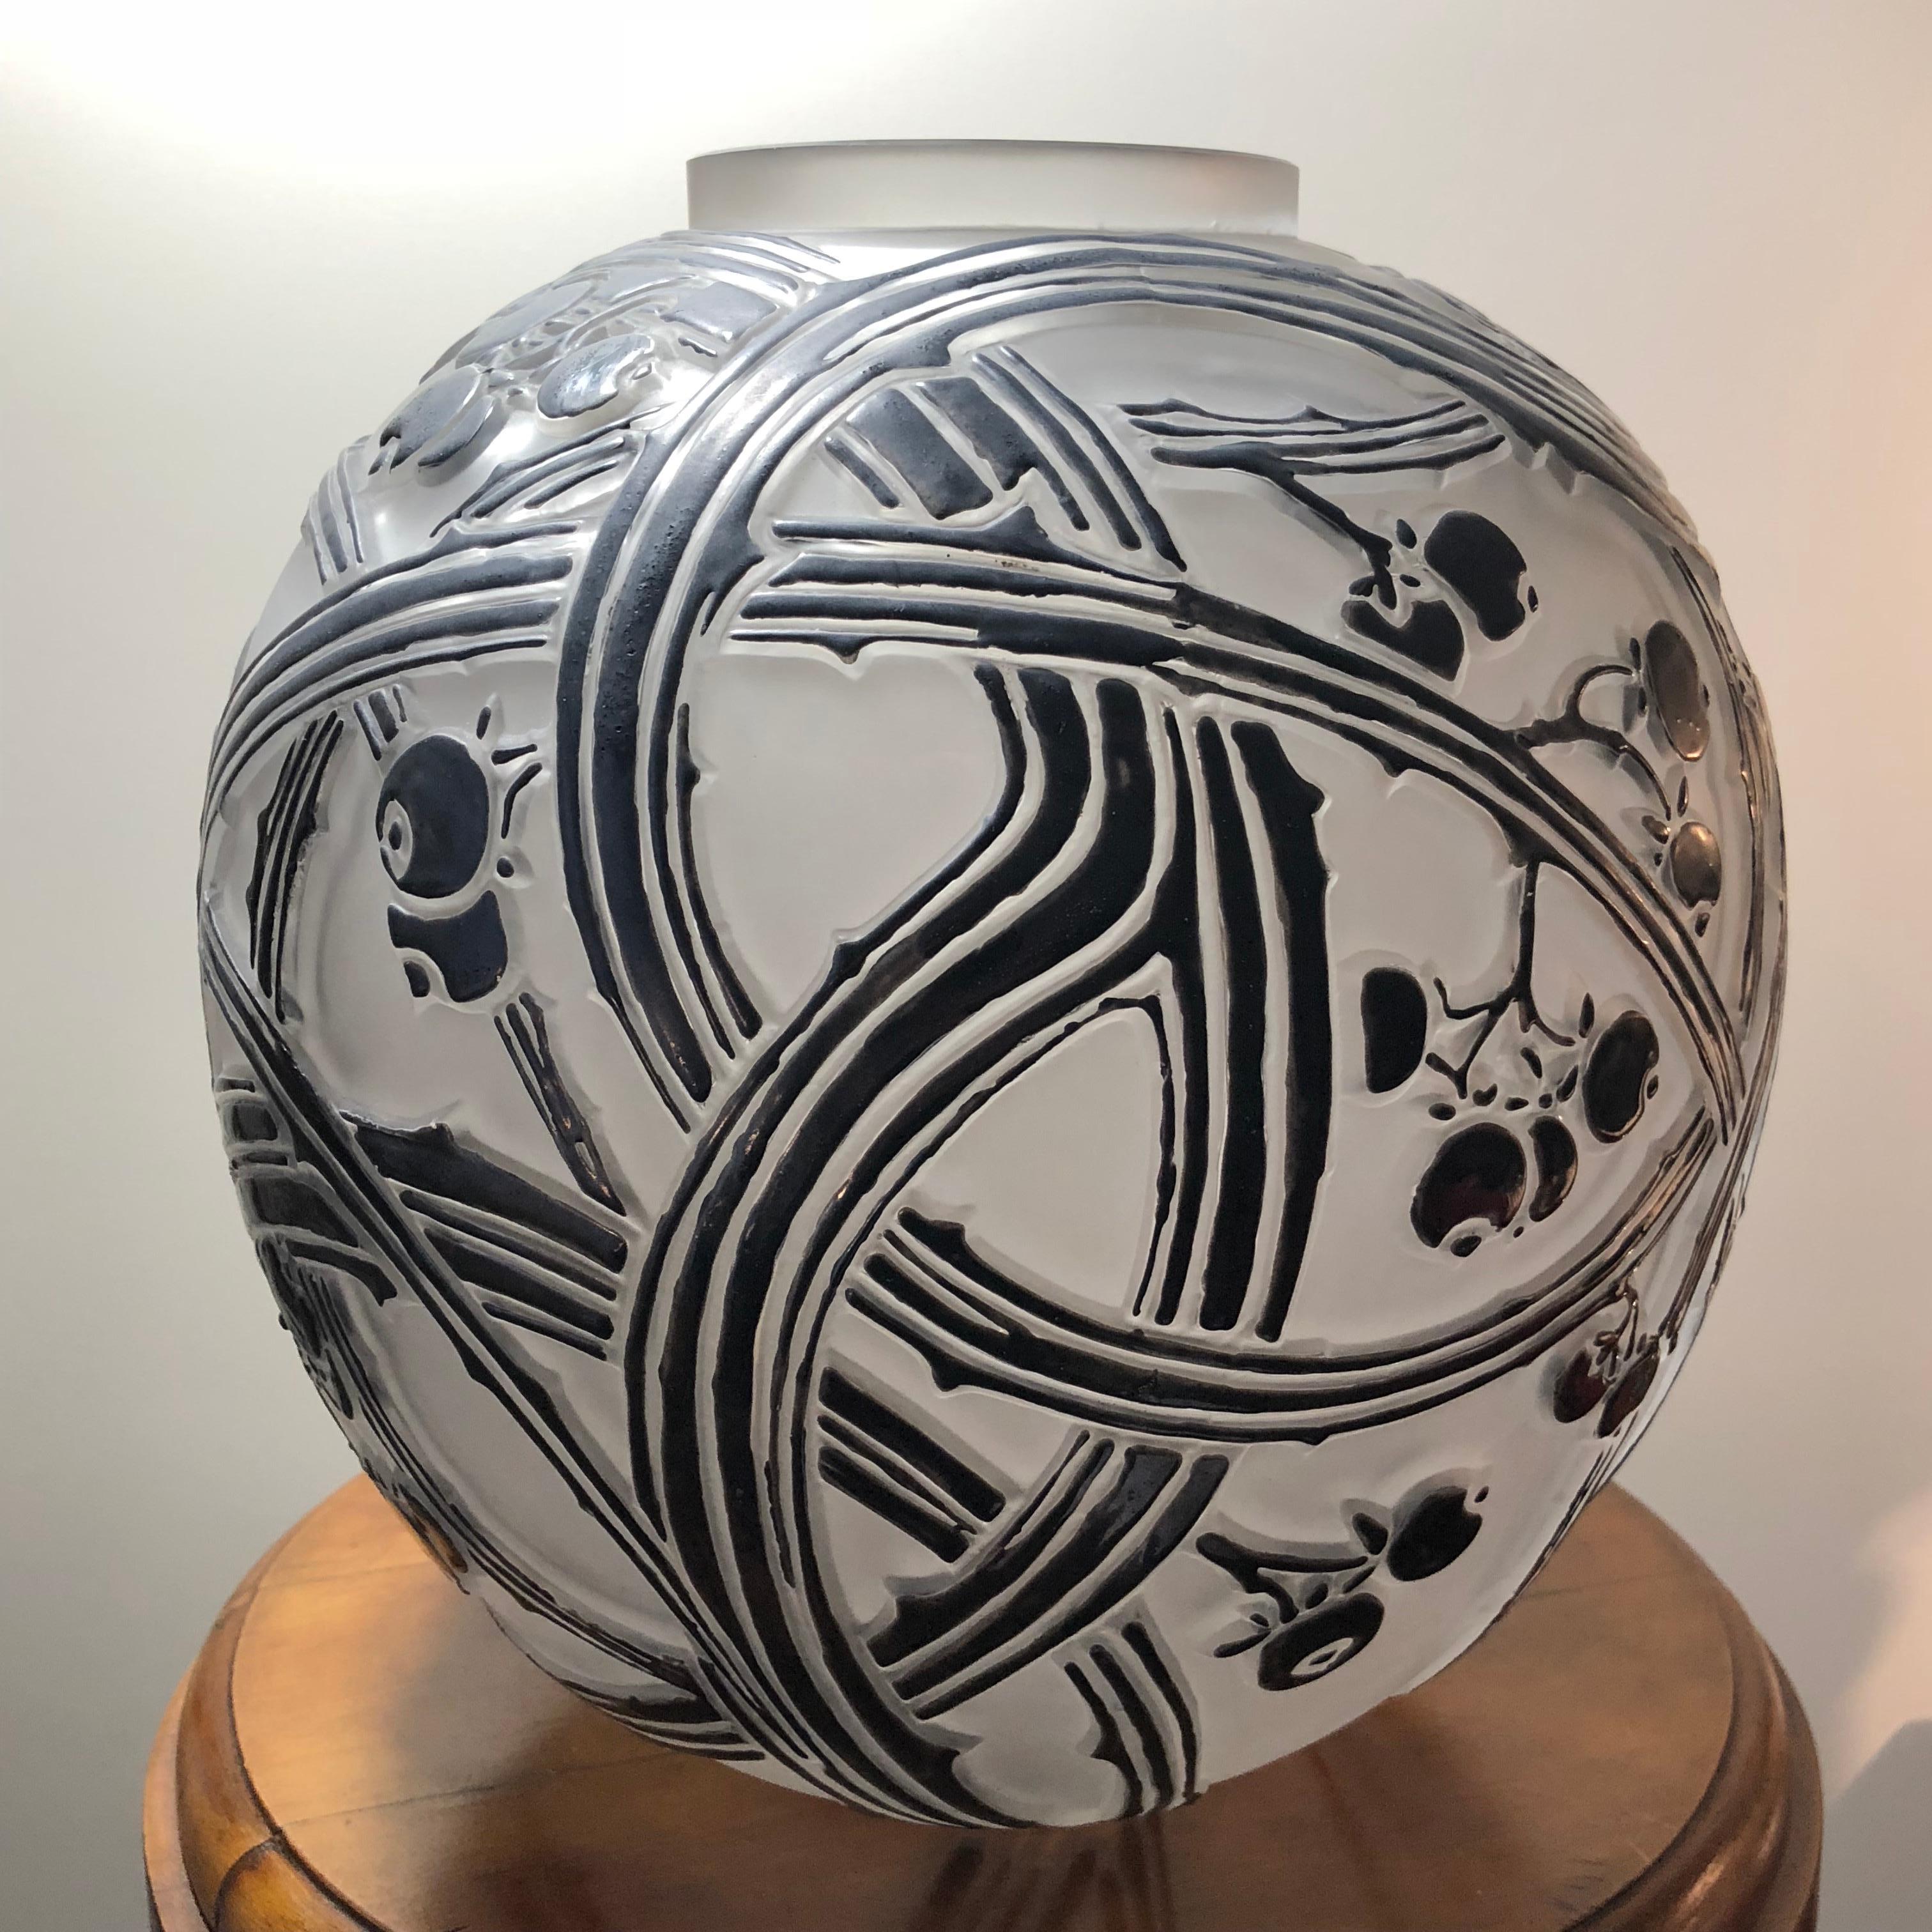 Early 20th Century 1924 Rene Lalique Baies Vase in Frosted Glass with Shinny Original Black Enamel